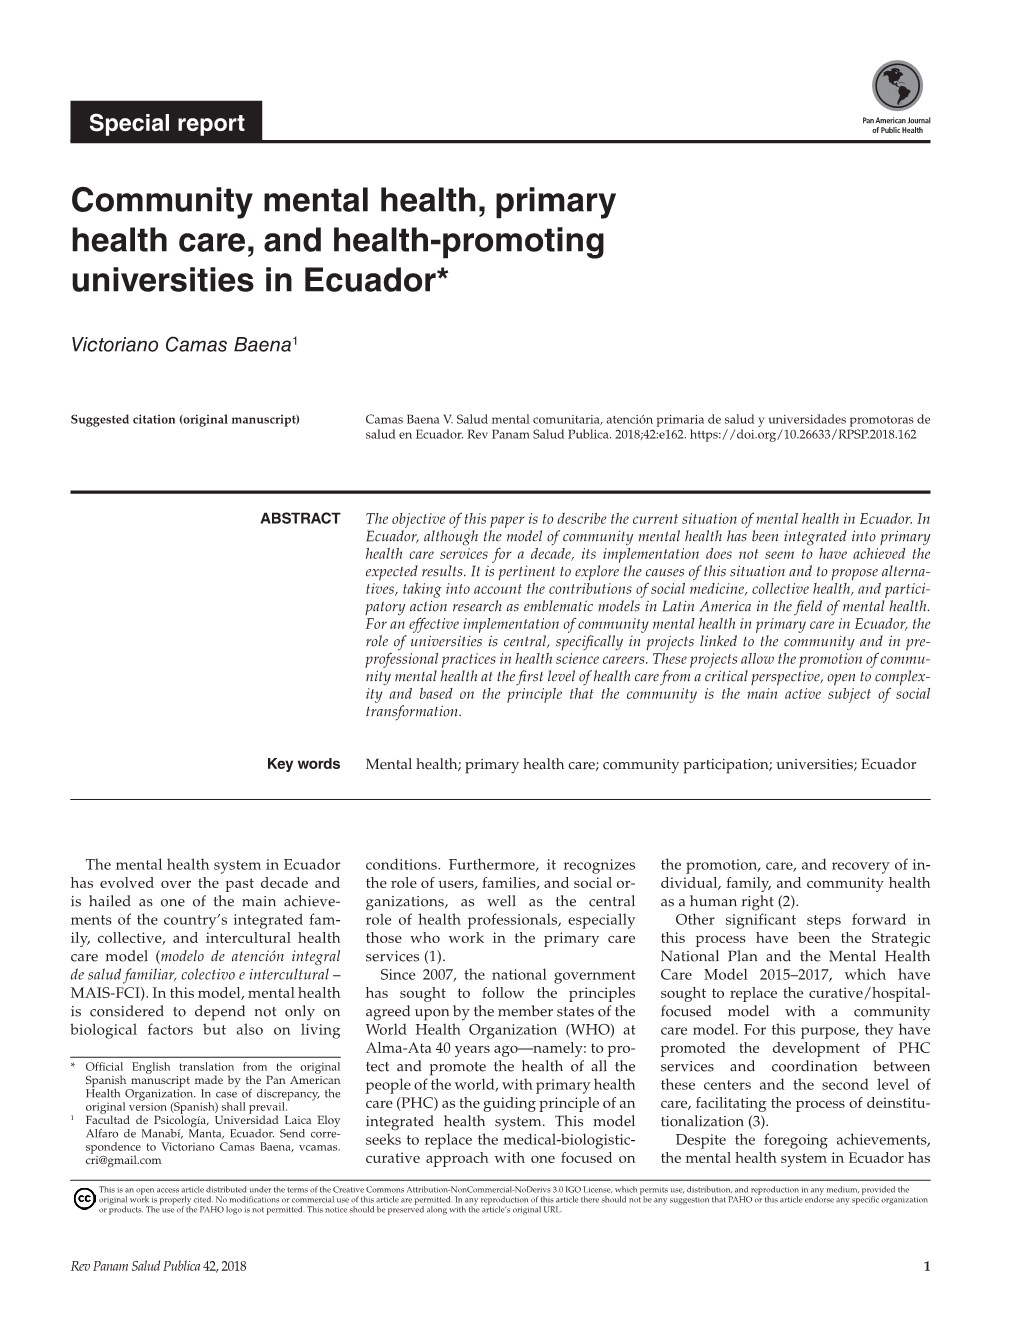 Community Mental Health, Primary Health Care, and Health-Promoting Universities in Ecuador*